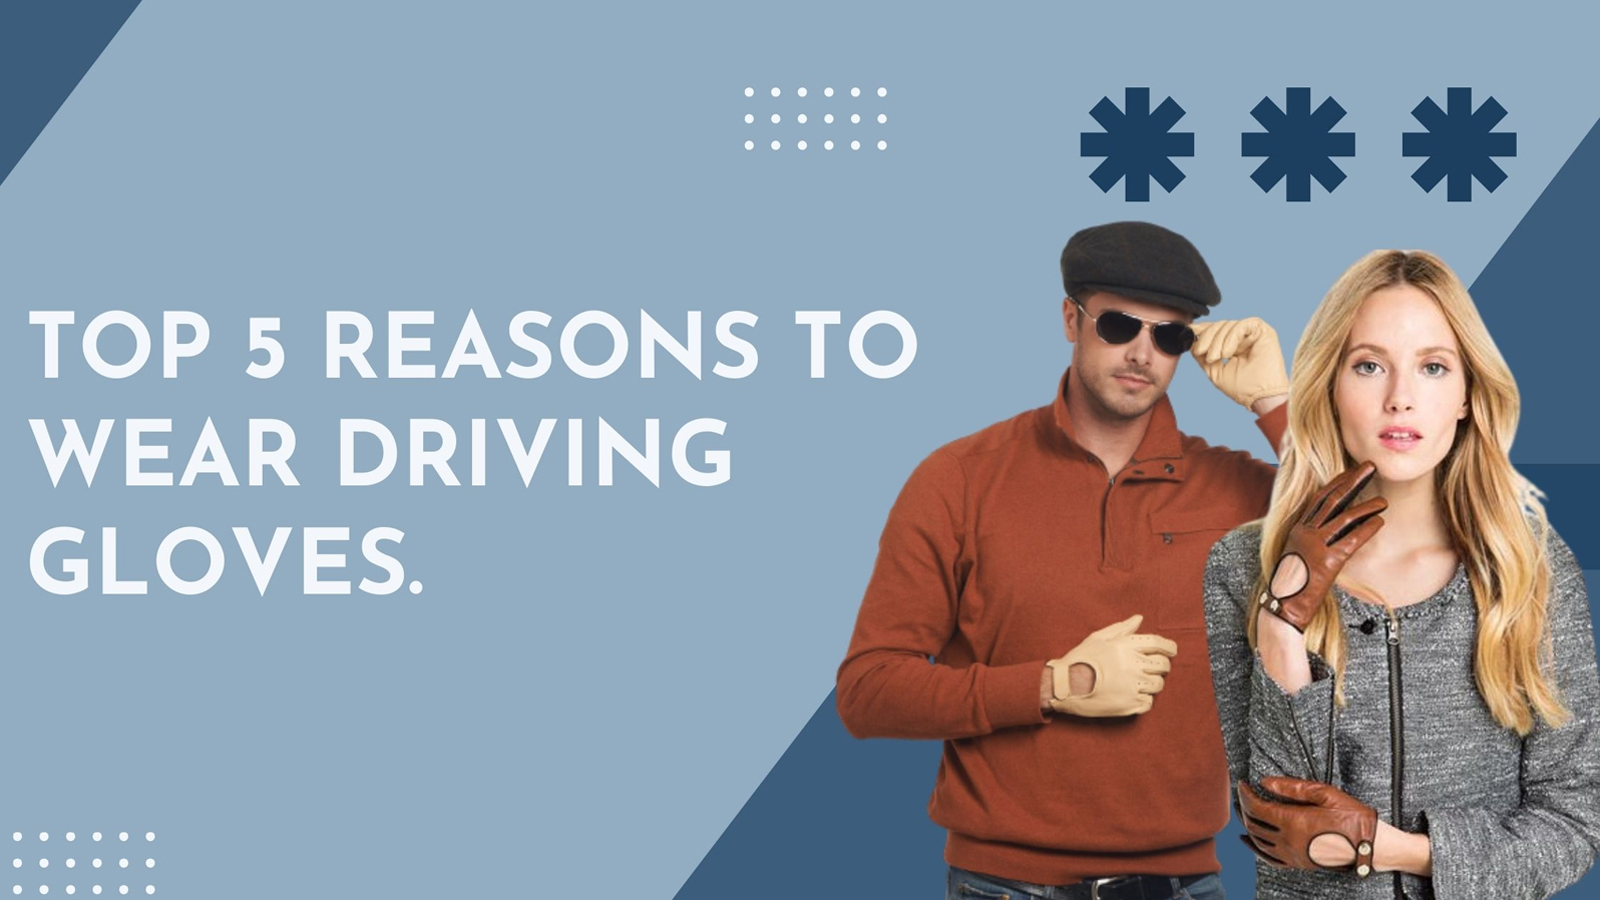 Top 5 Reasons to Wear Driving Gloves